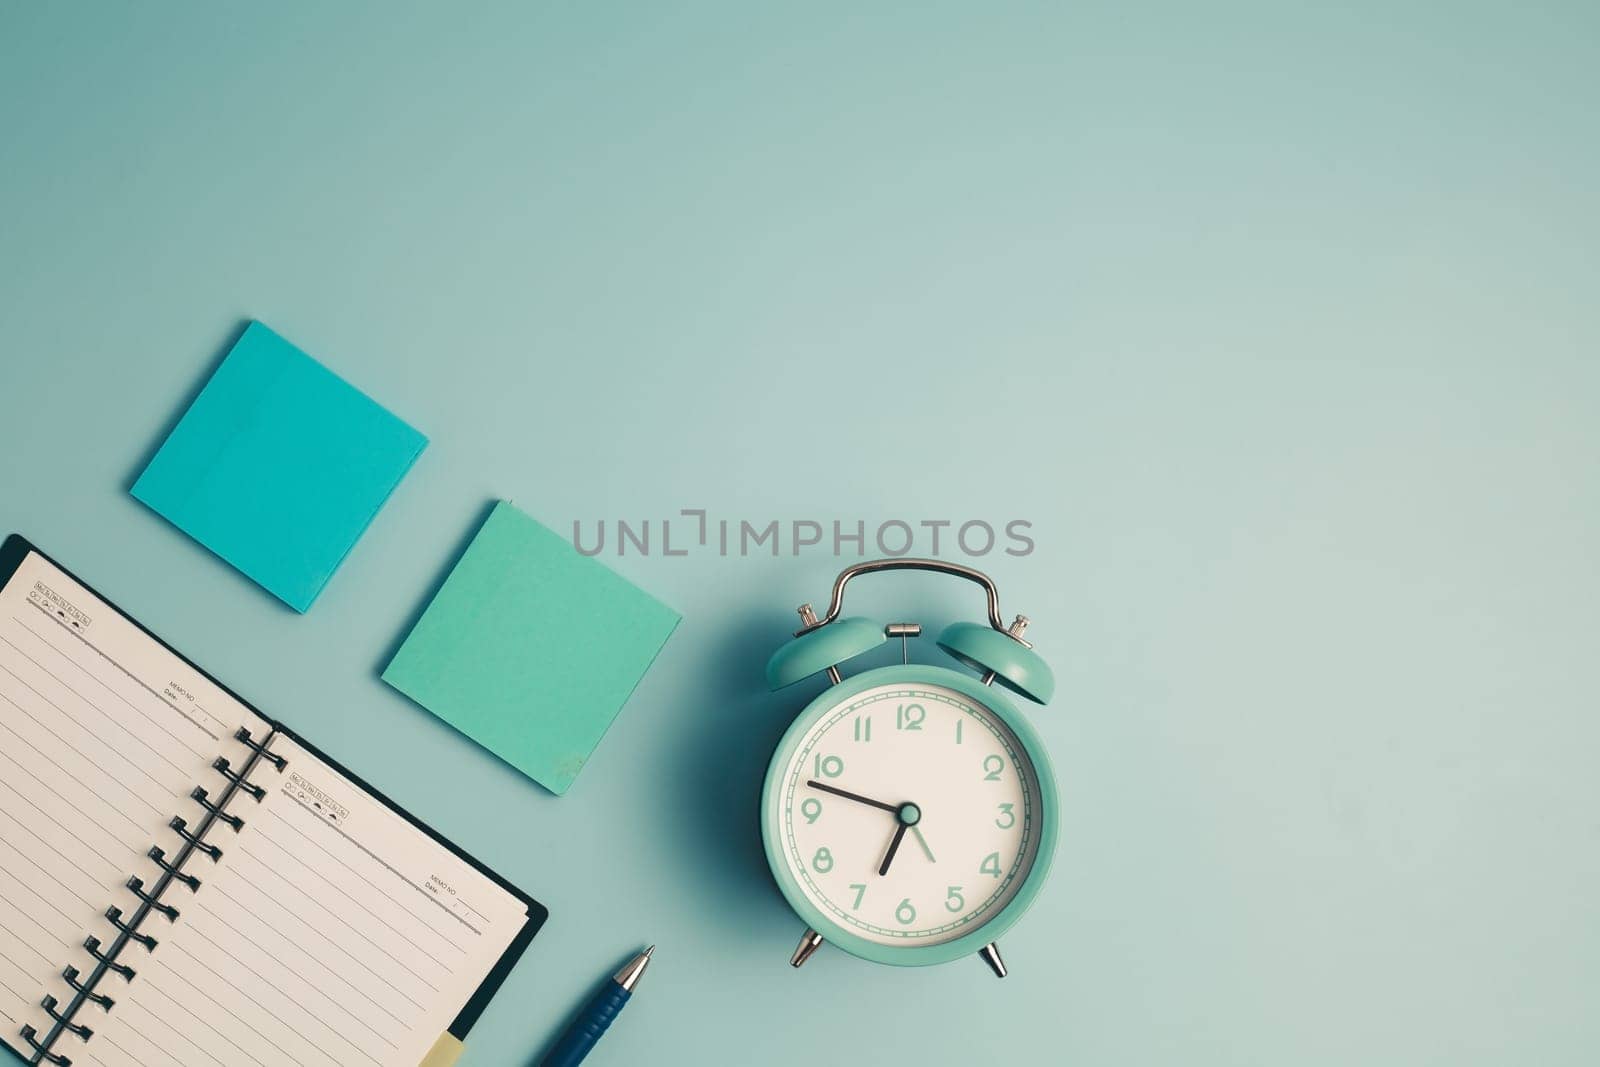 An alarm clock with a diary notebook and others work and educational materials on blue background for the concept of work, study and time management.